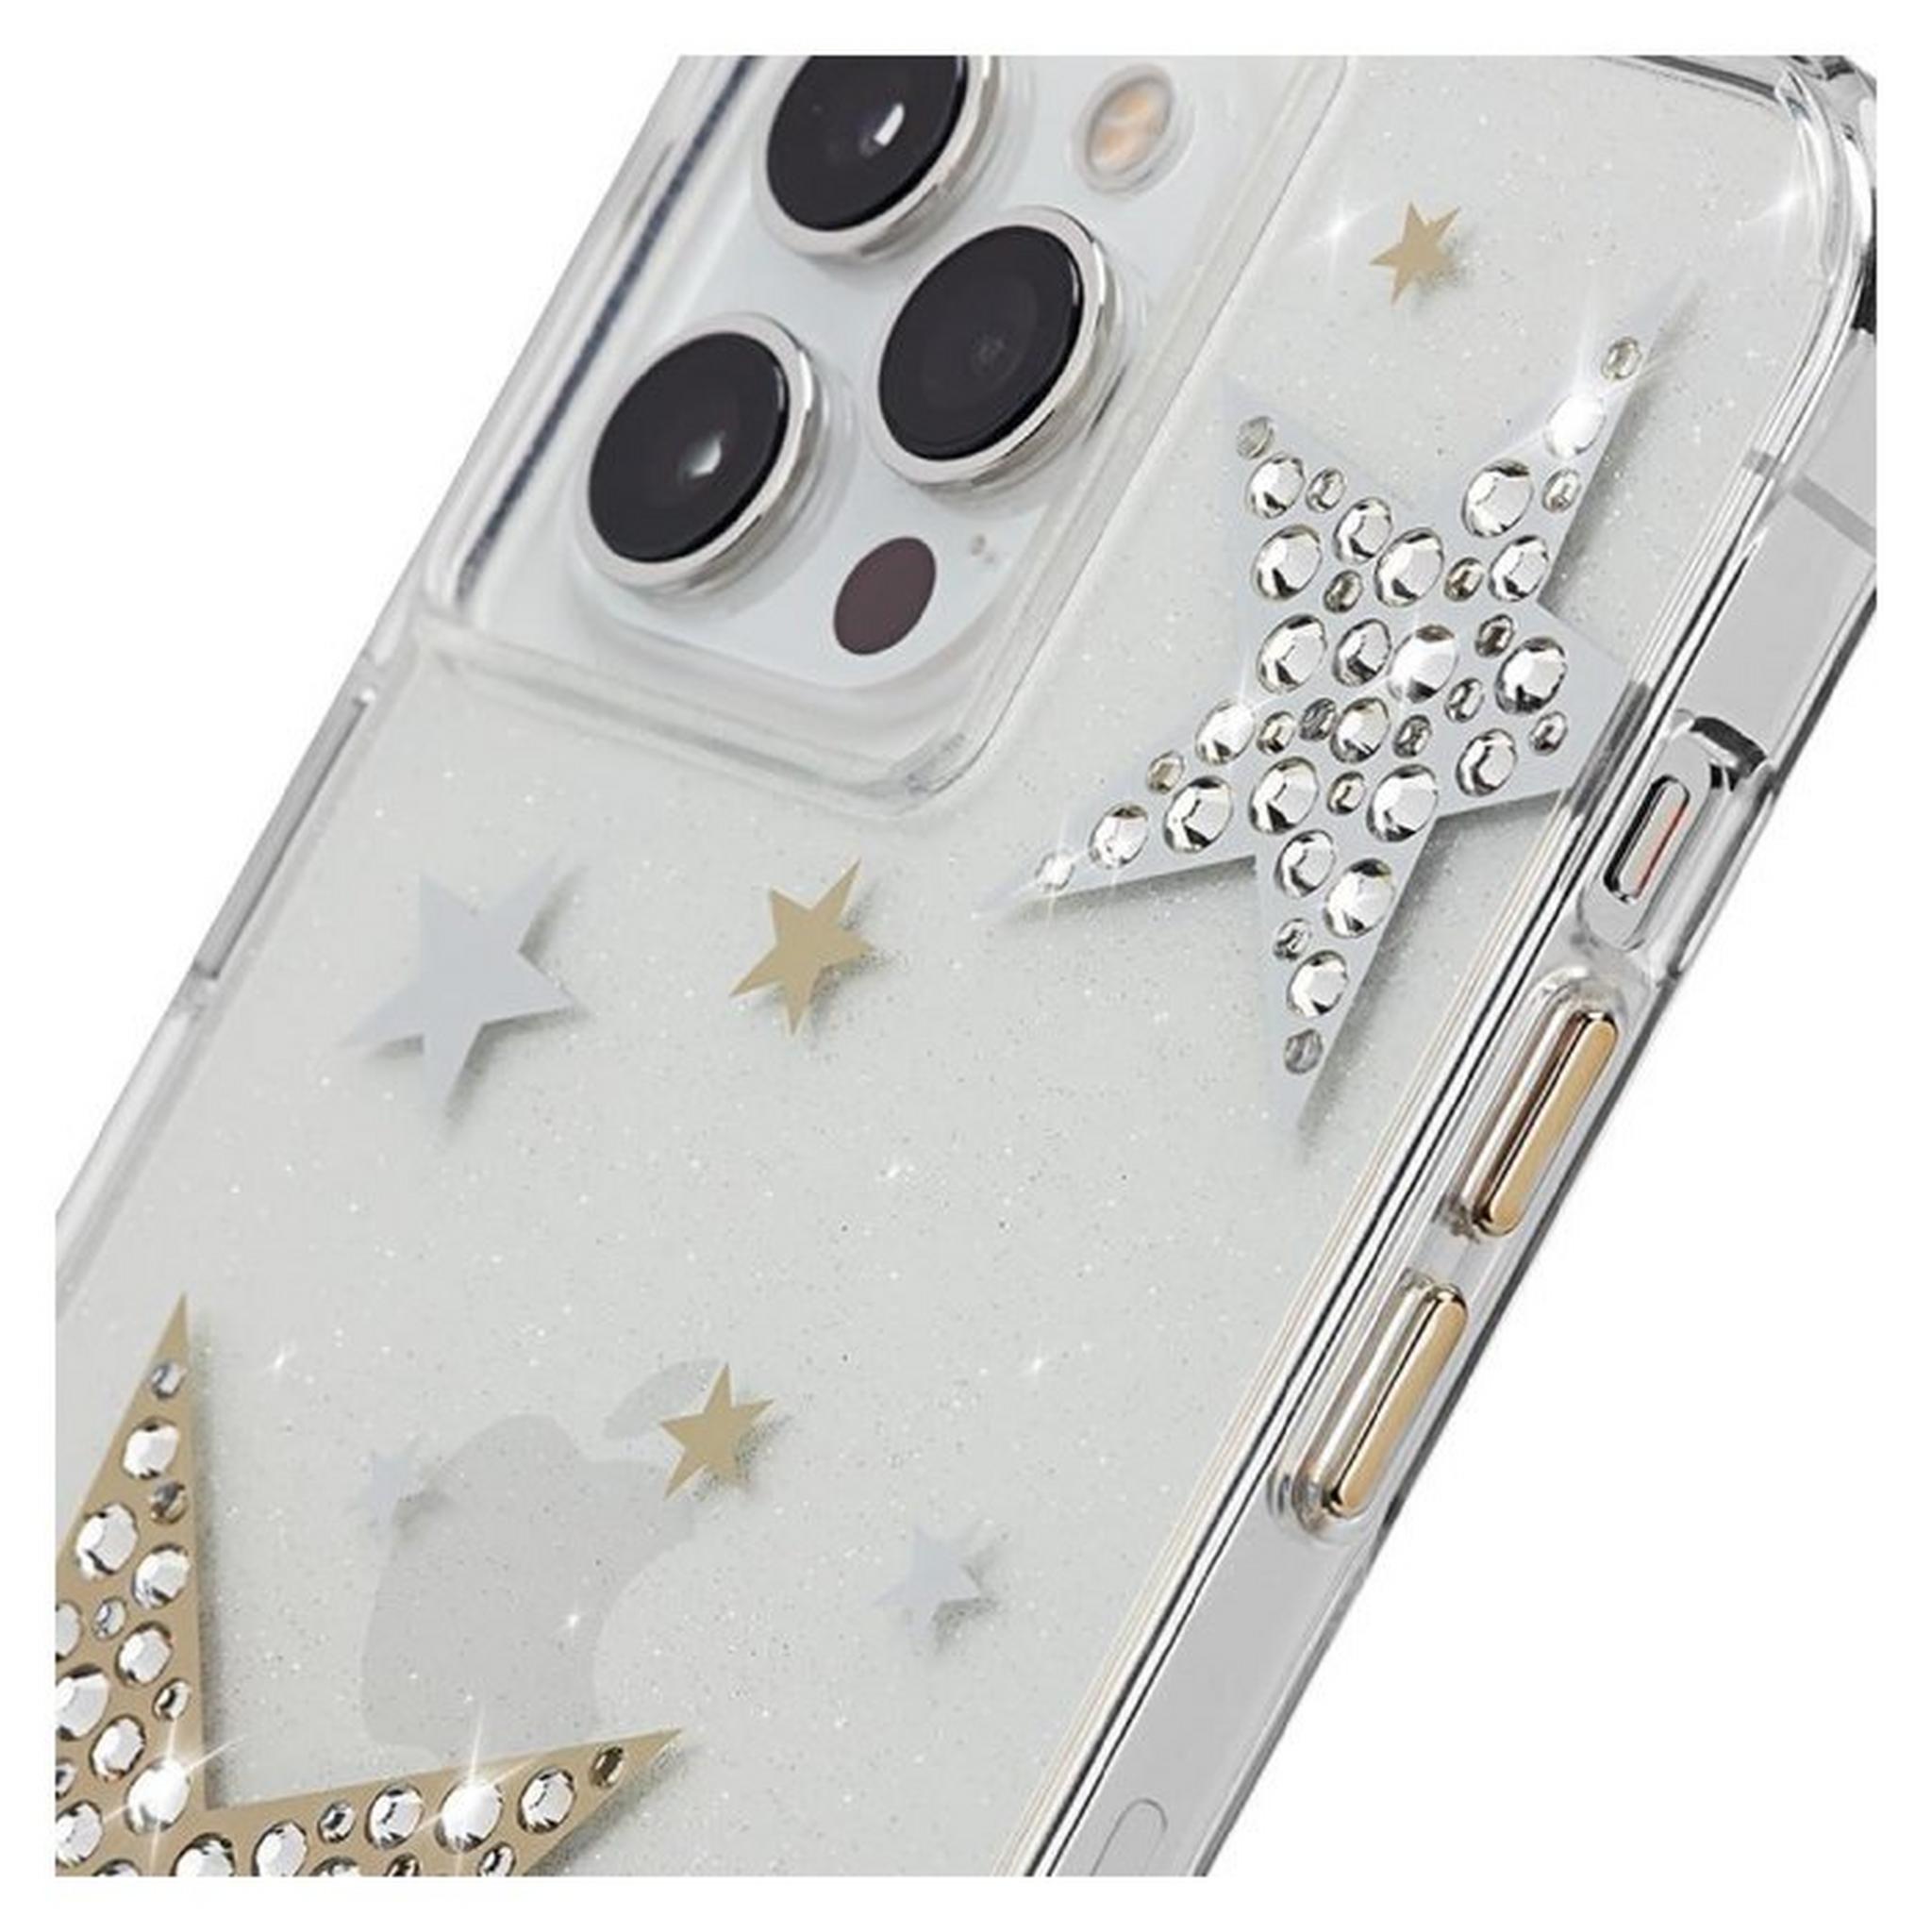 Case-Mate Sheer SuperStar Cover for iPhone 13 Pro Max - Clear